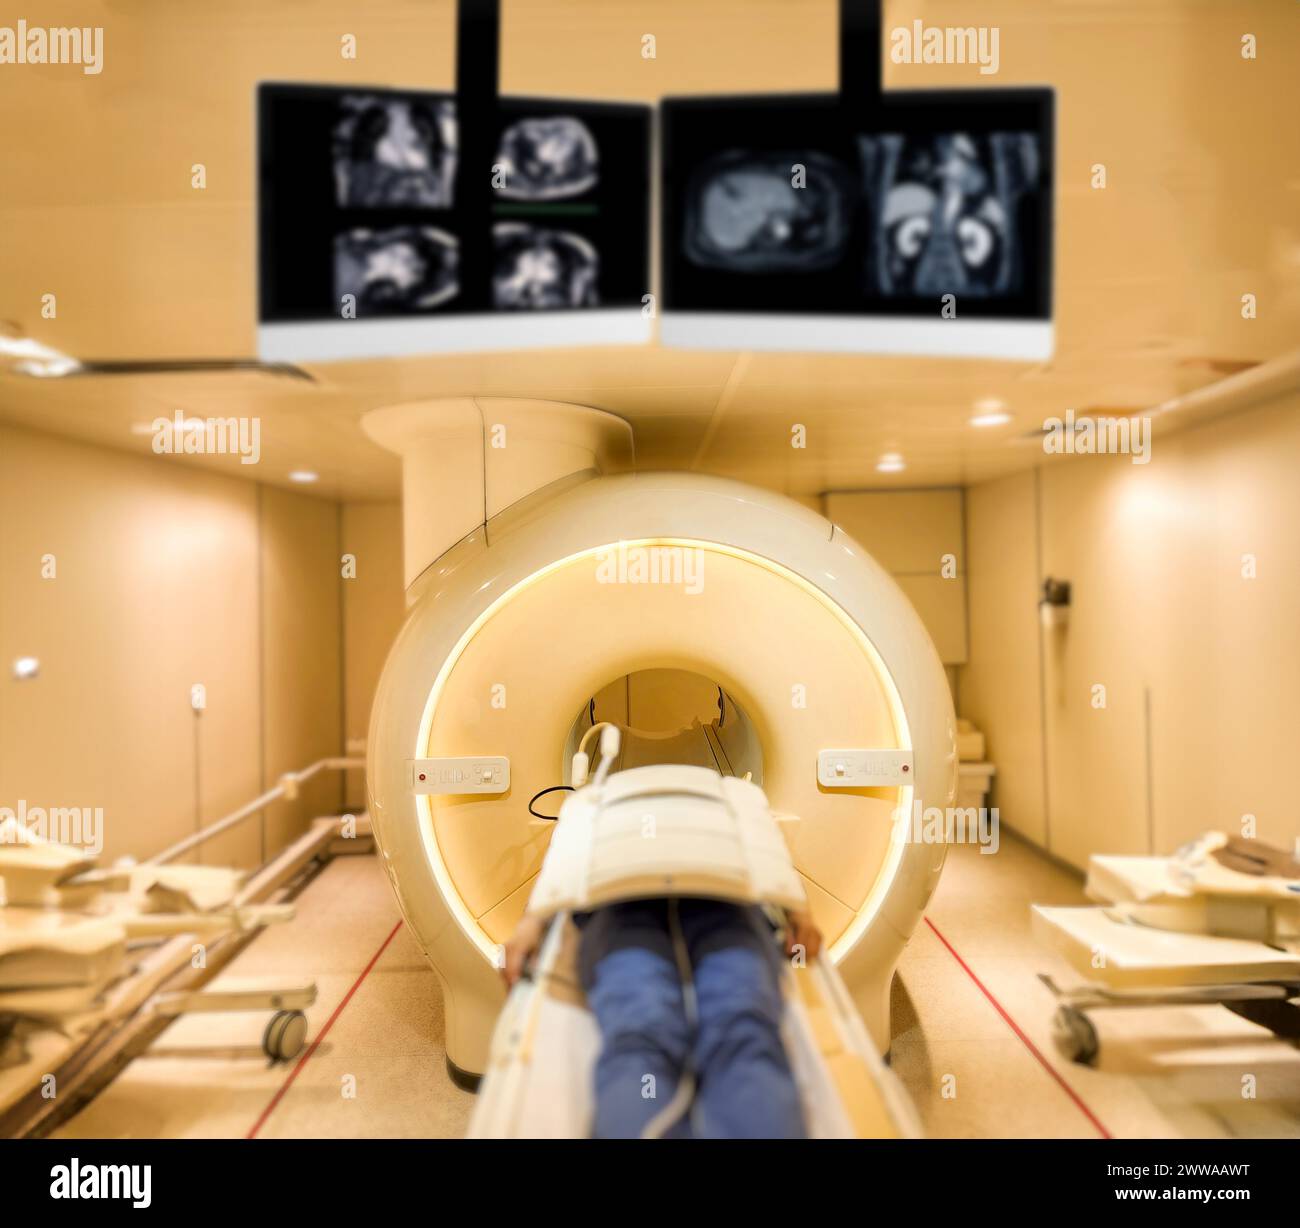 A patient lies down comfortably on the MRI scanner, undergoing a relaxing MRI scan to assess the upper abdomen, providing crucial medical insights. Stock Photo